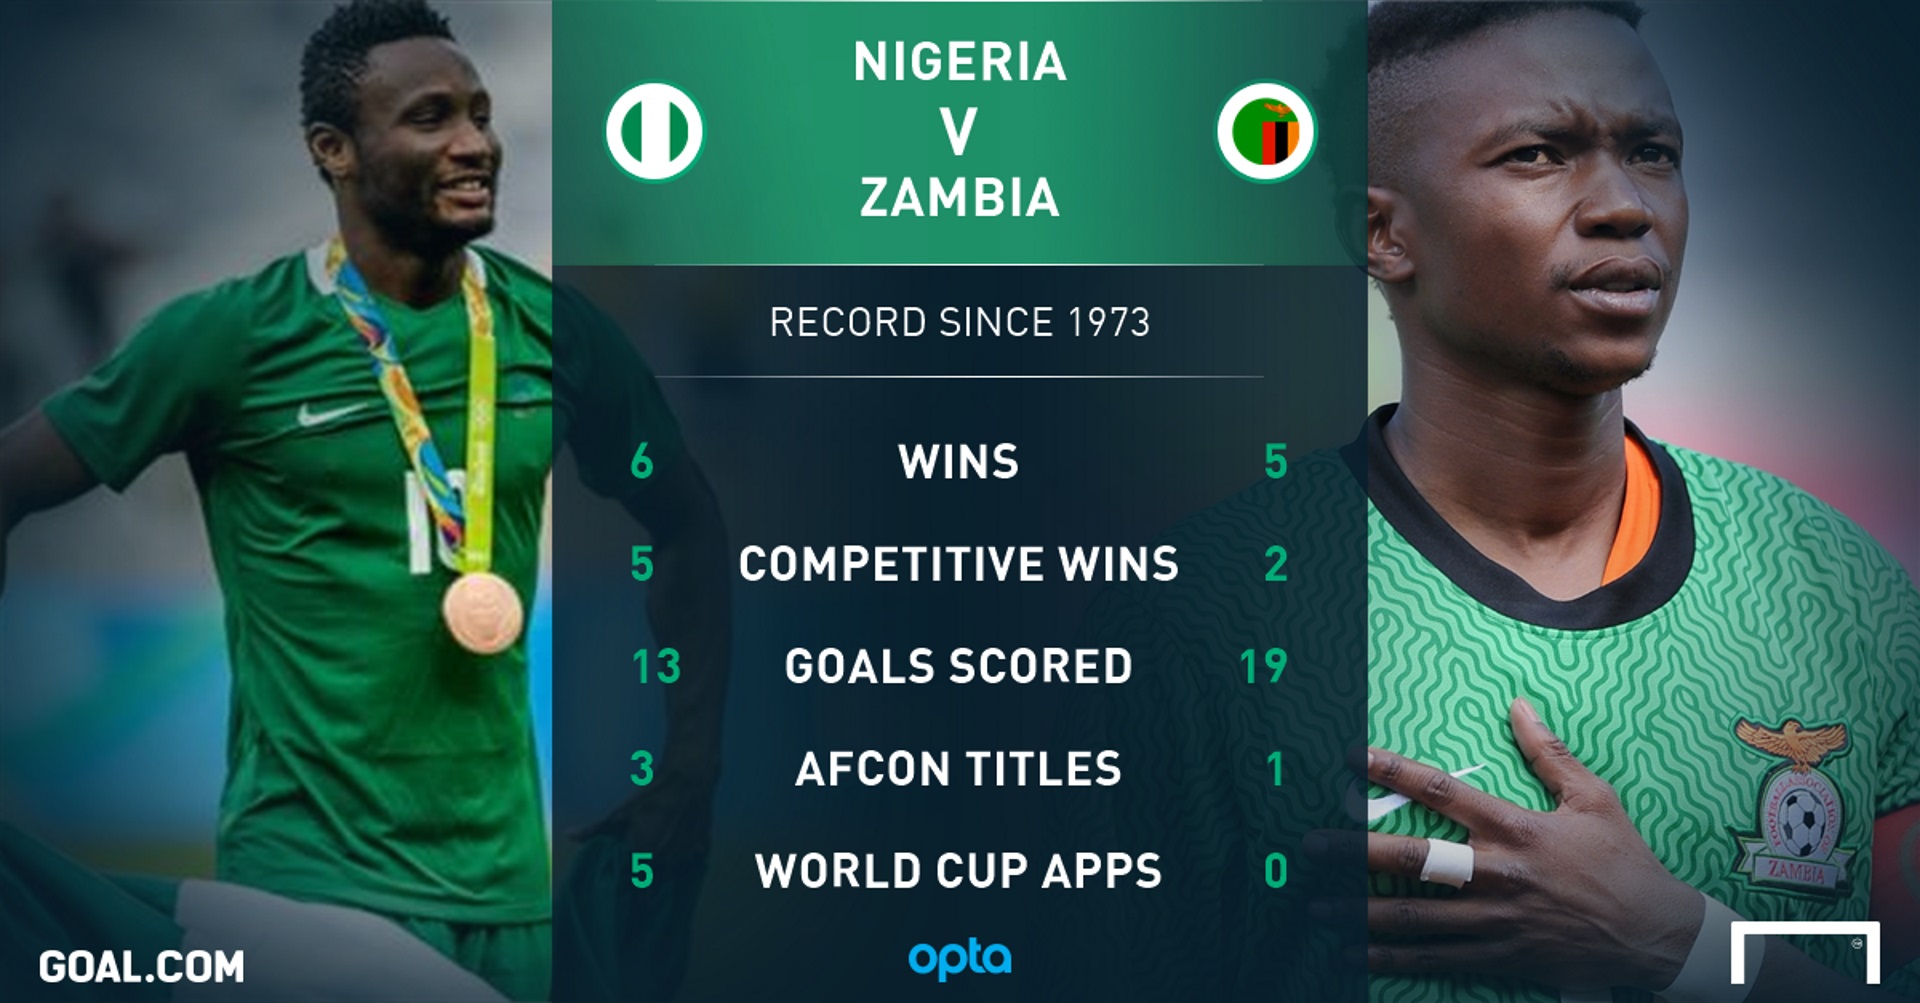 1 a win competition. Нигерия time. Zambia win. Hw many times Nigeria has won World Cup. Zambia vs Japan FLAC.